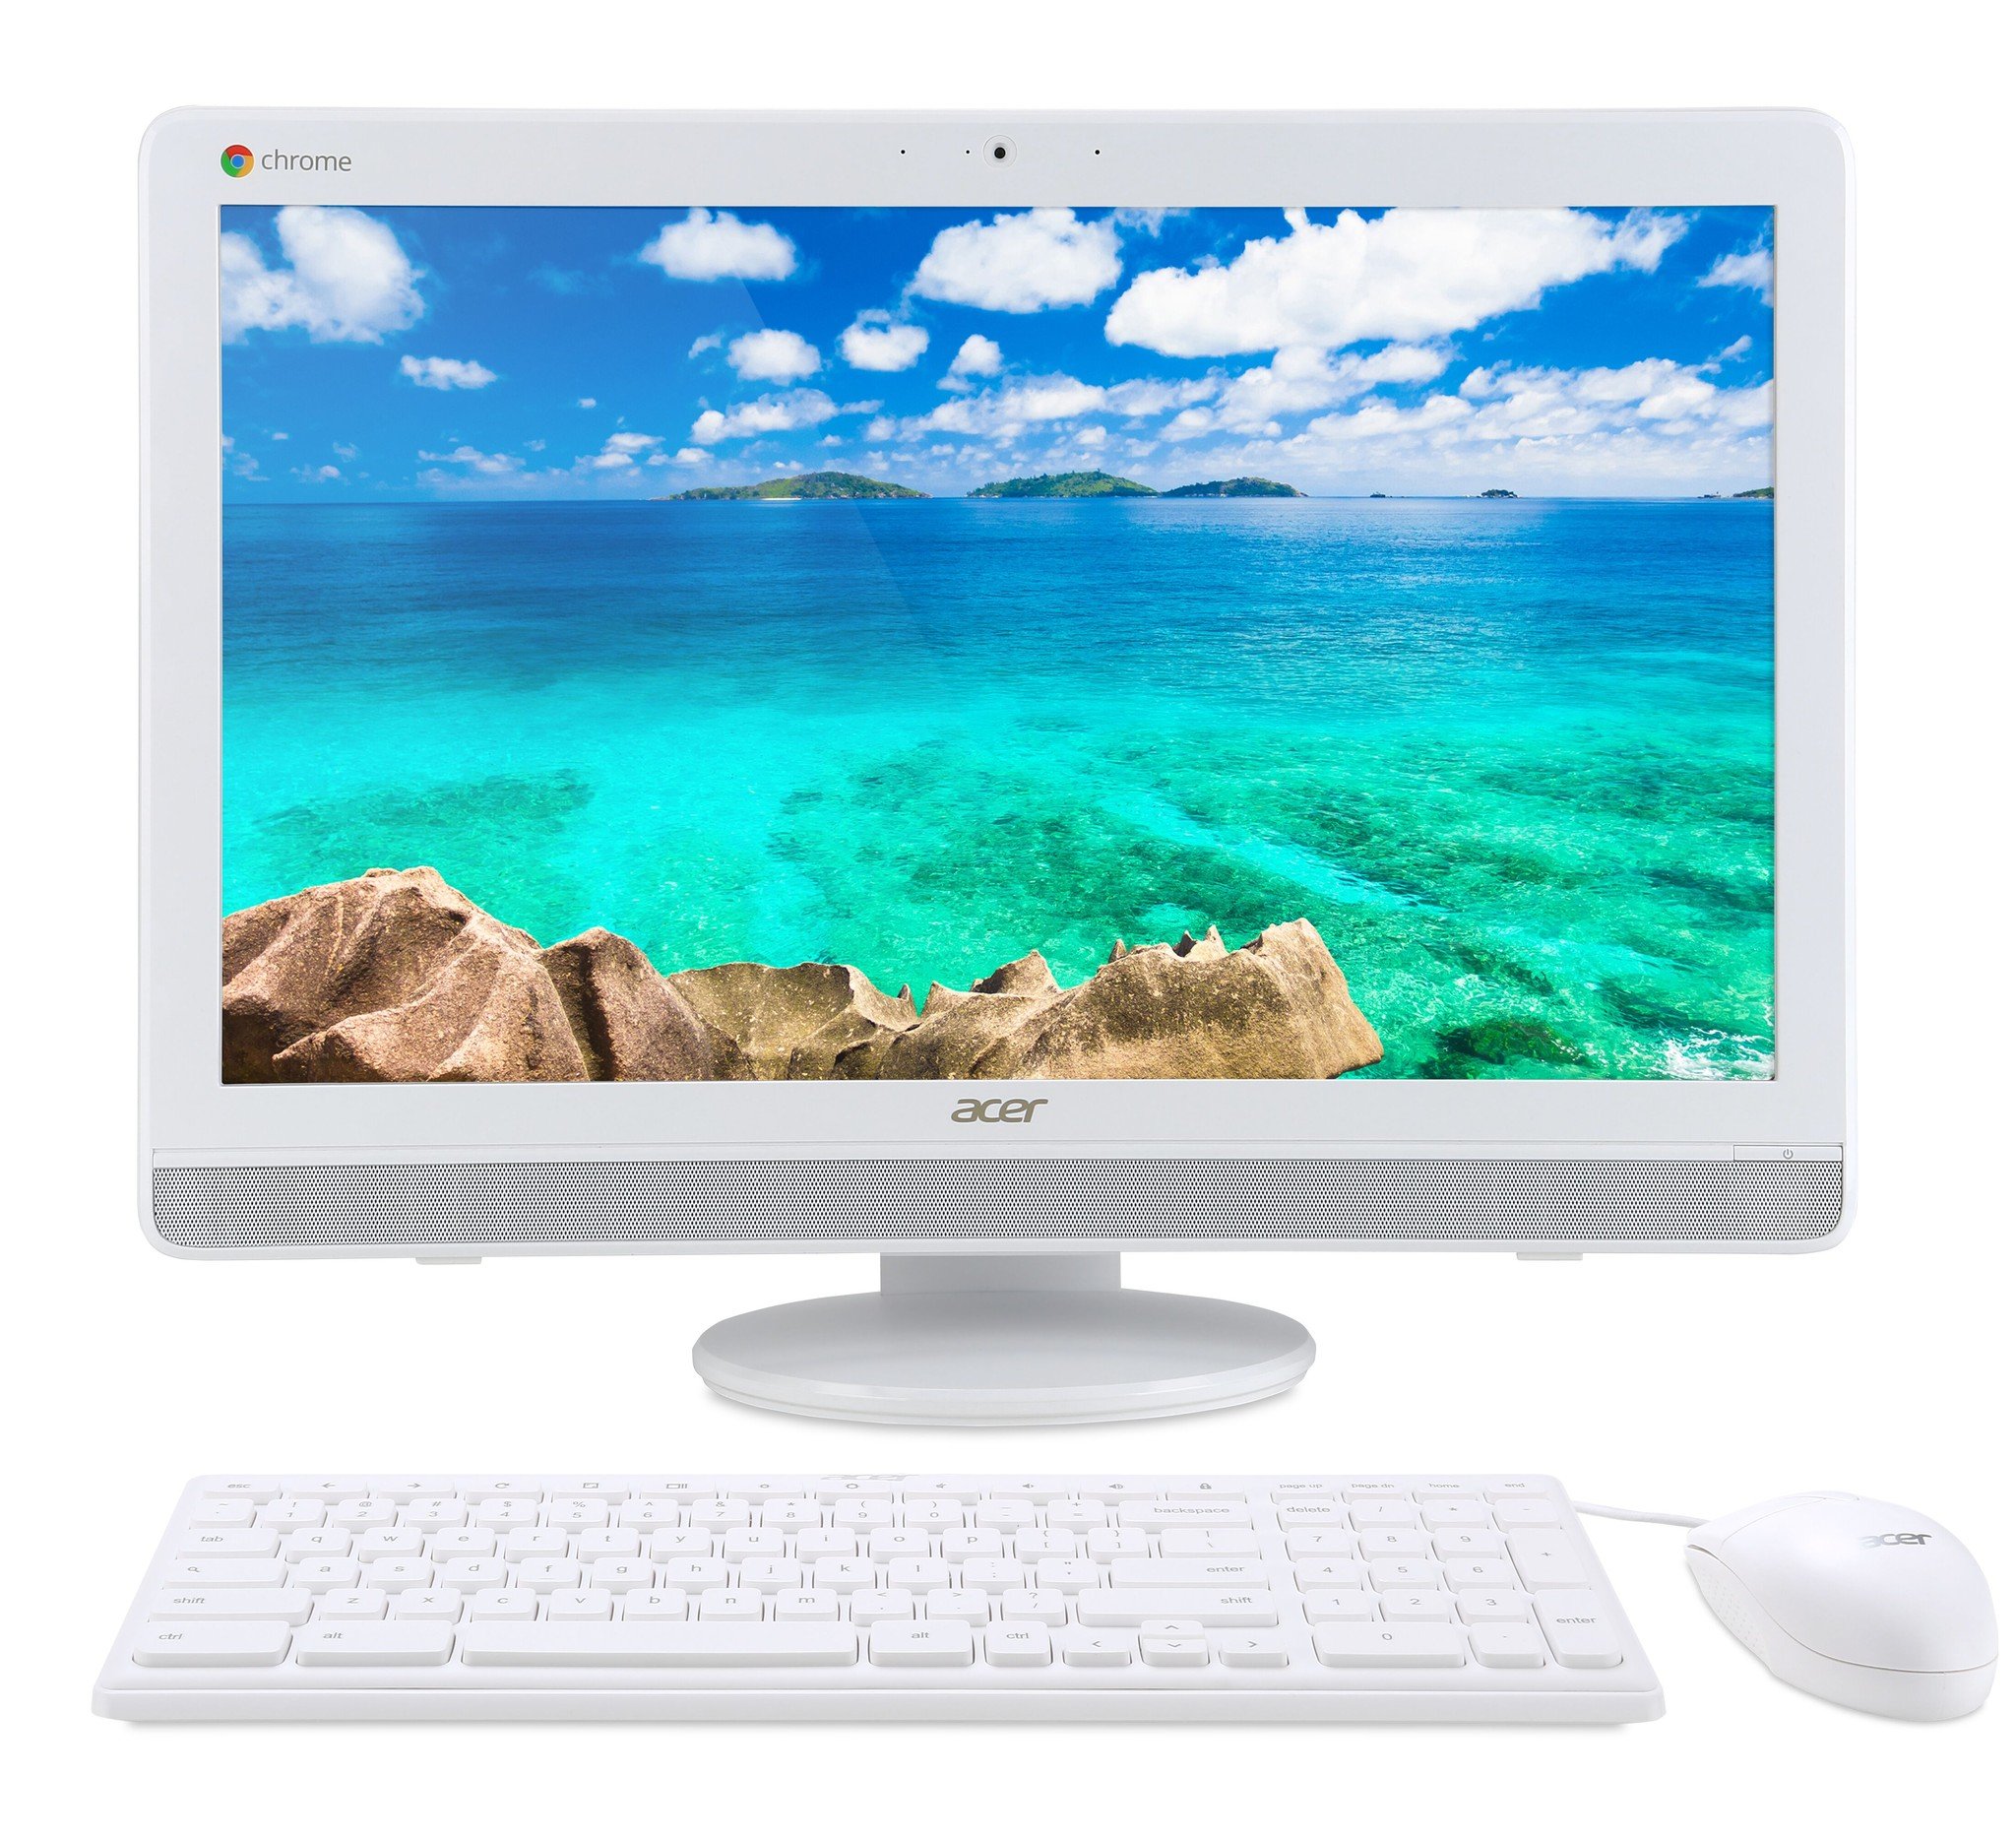 Acer&#39;s all-in-one Chromebase is now available in the U.S. starting at $329